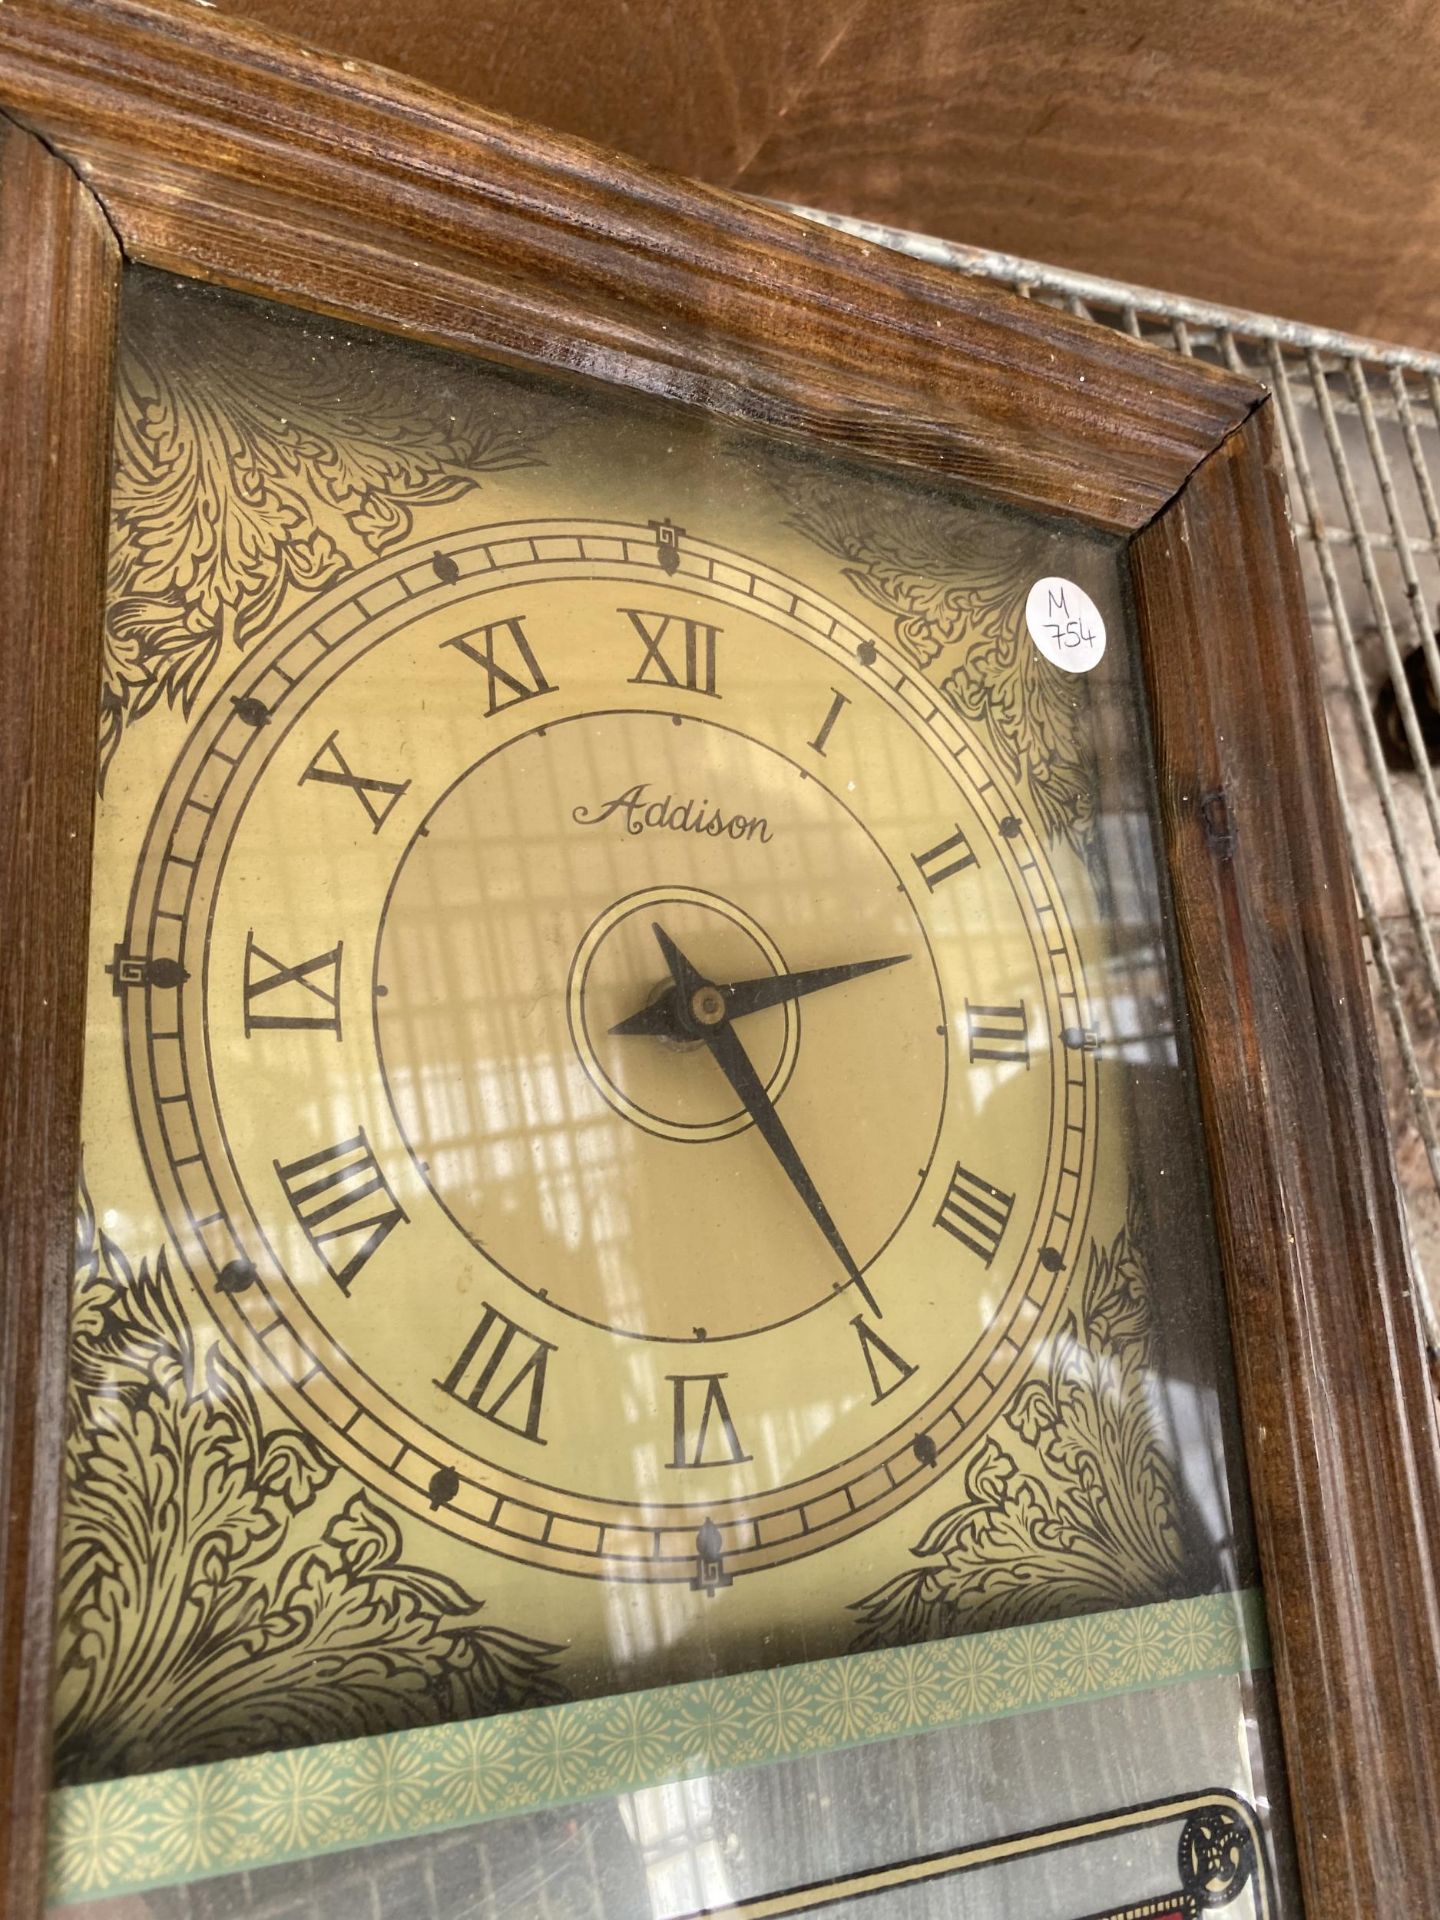 A VINTAGE WALL CLOCK WITH DECORATIVE MIRRORED DETAIL - Image 3 of 3